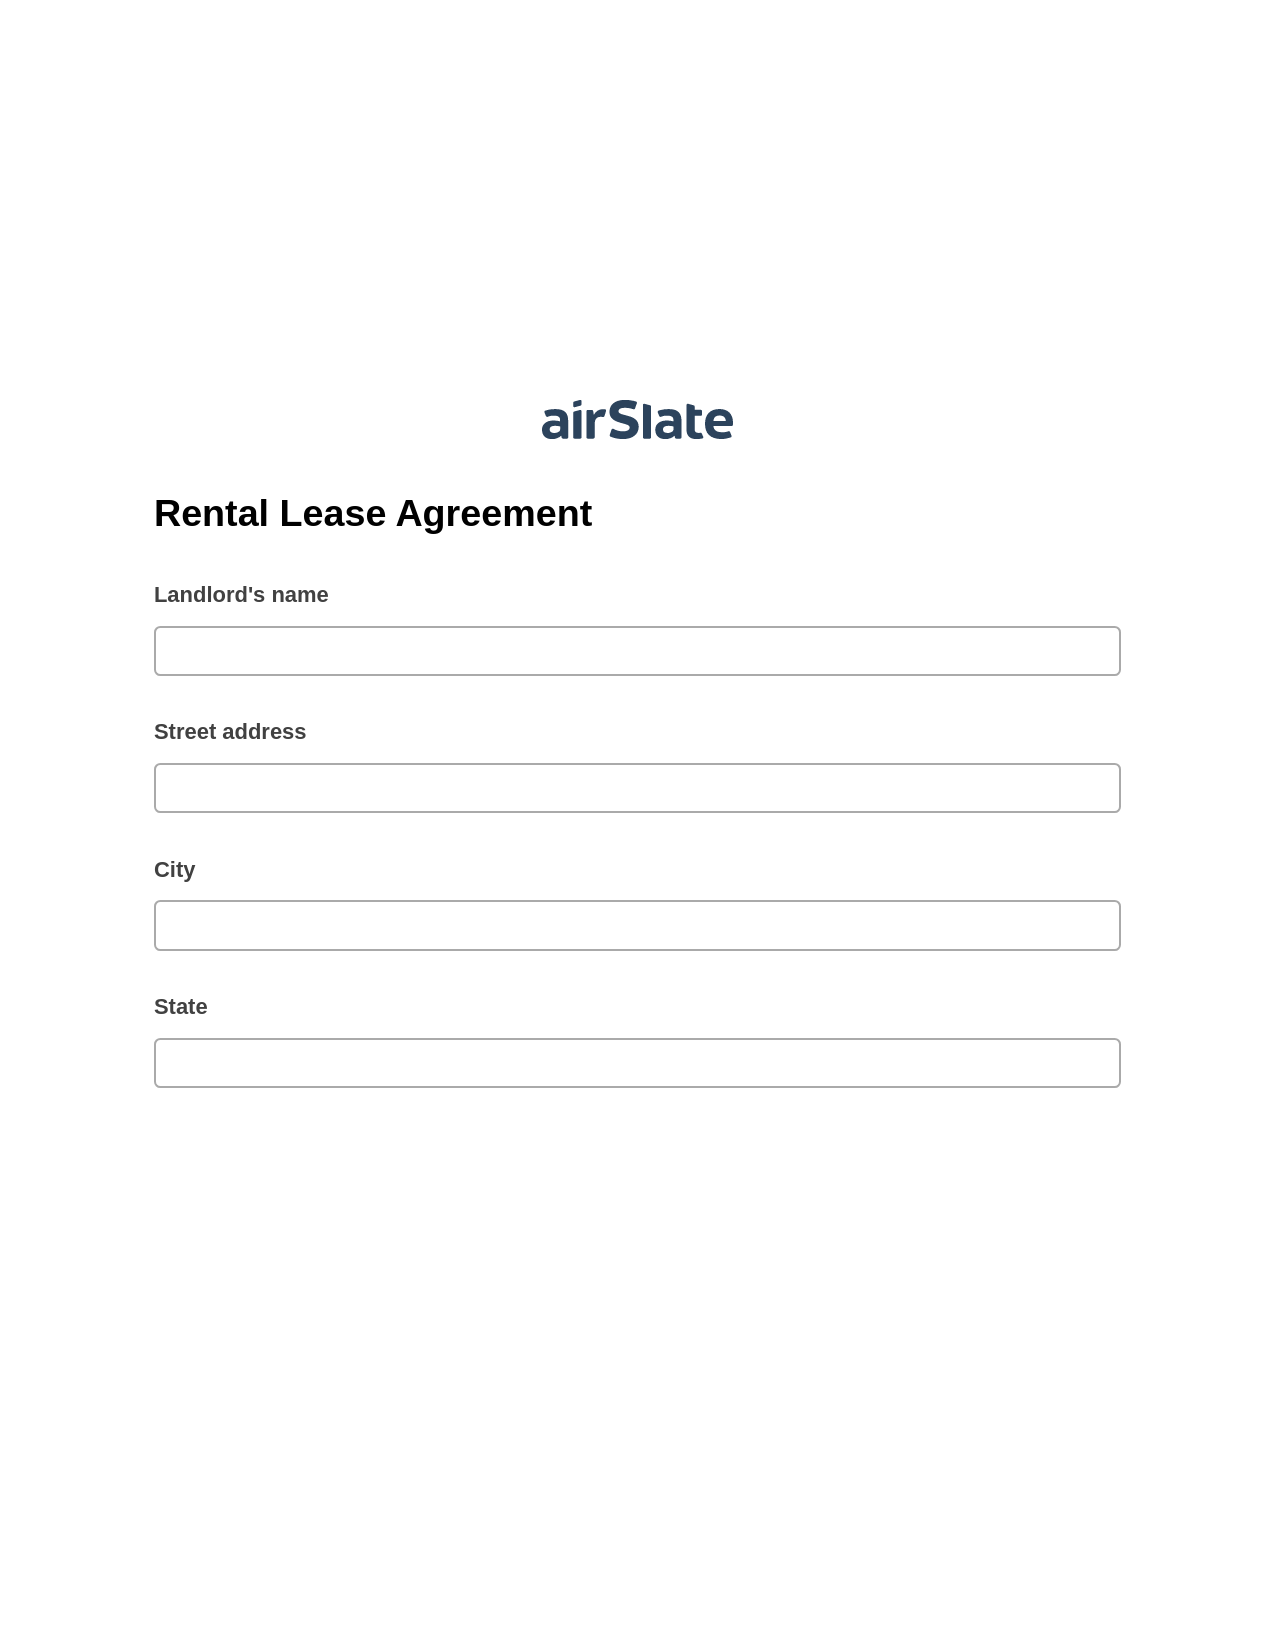 Rental Lease Agreement Pre-fill Slate from MS Dynamics 365 Records Bot, Update MS Dynamics 365 Record Bot, Email Notification Postfinish Bot